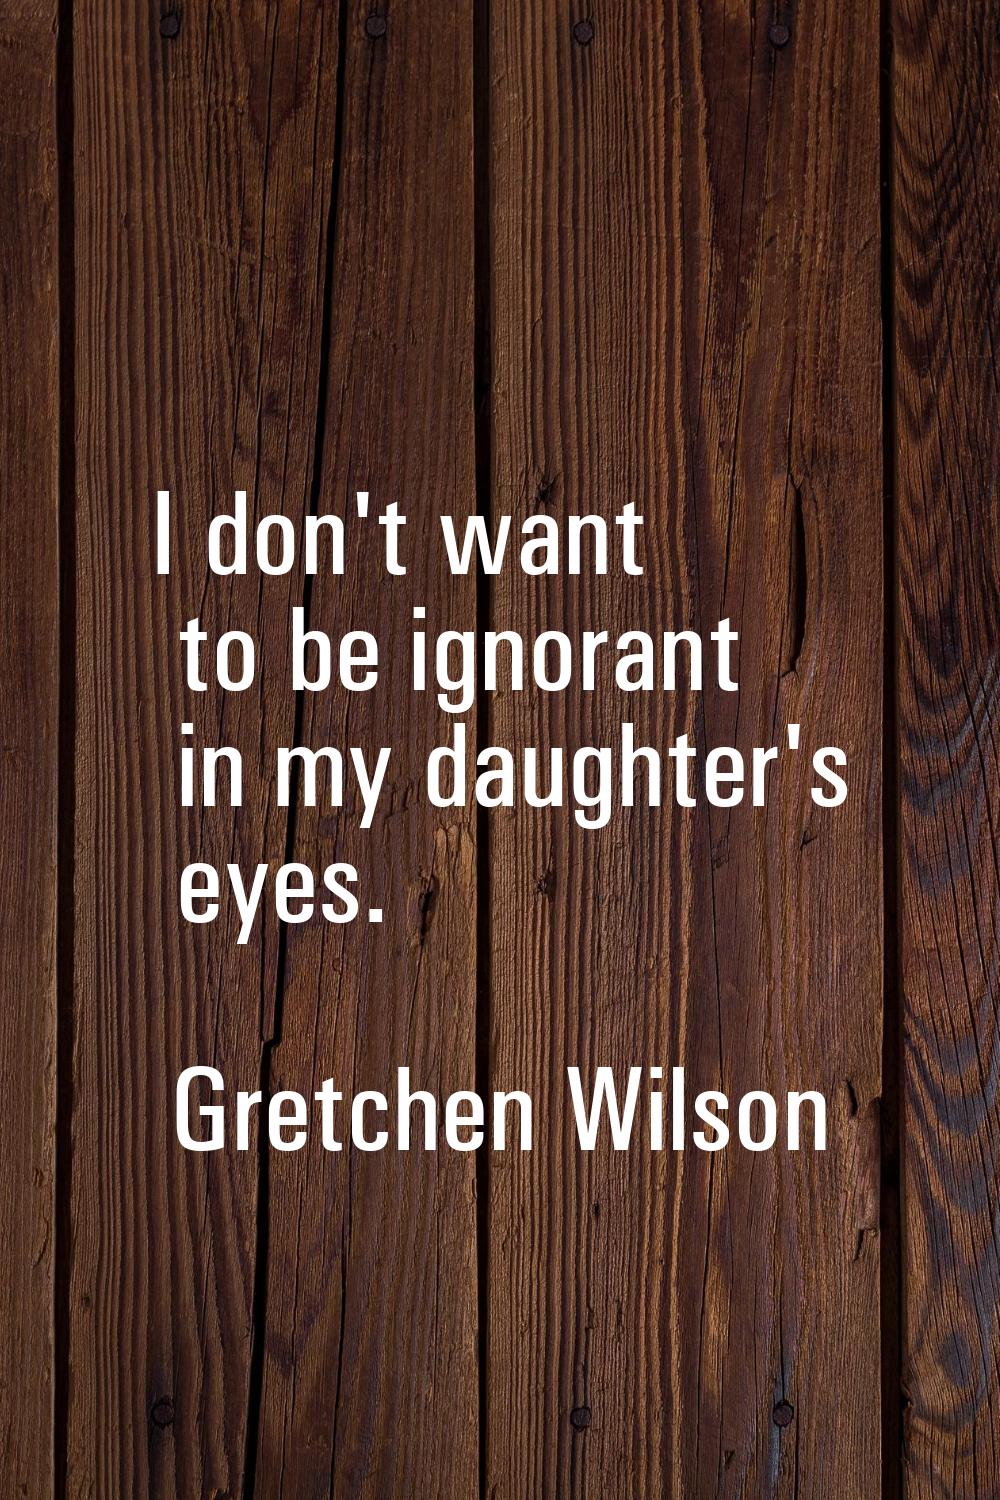 I don't want to be ignorant in my daughter's eyes.